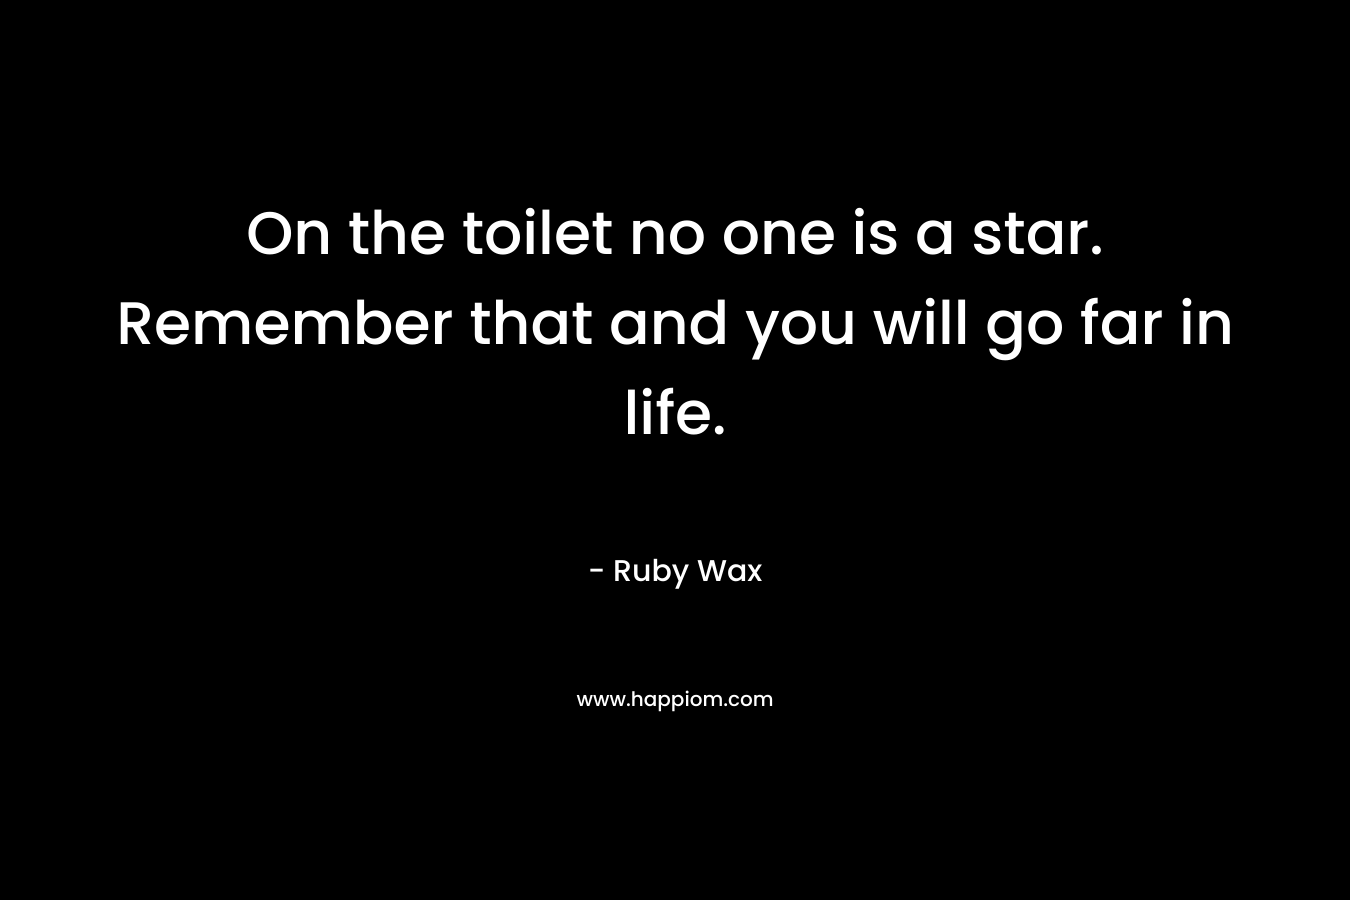 On the toilet no one is a star. Remember that and you will go far in life. – Ruby Wax